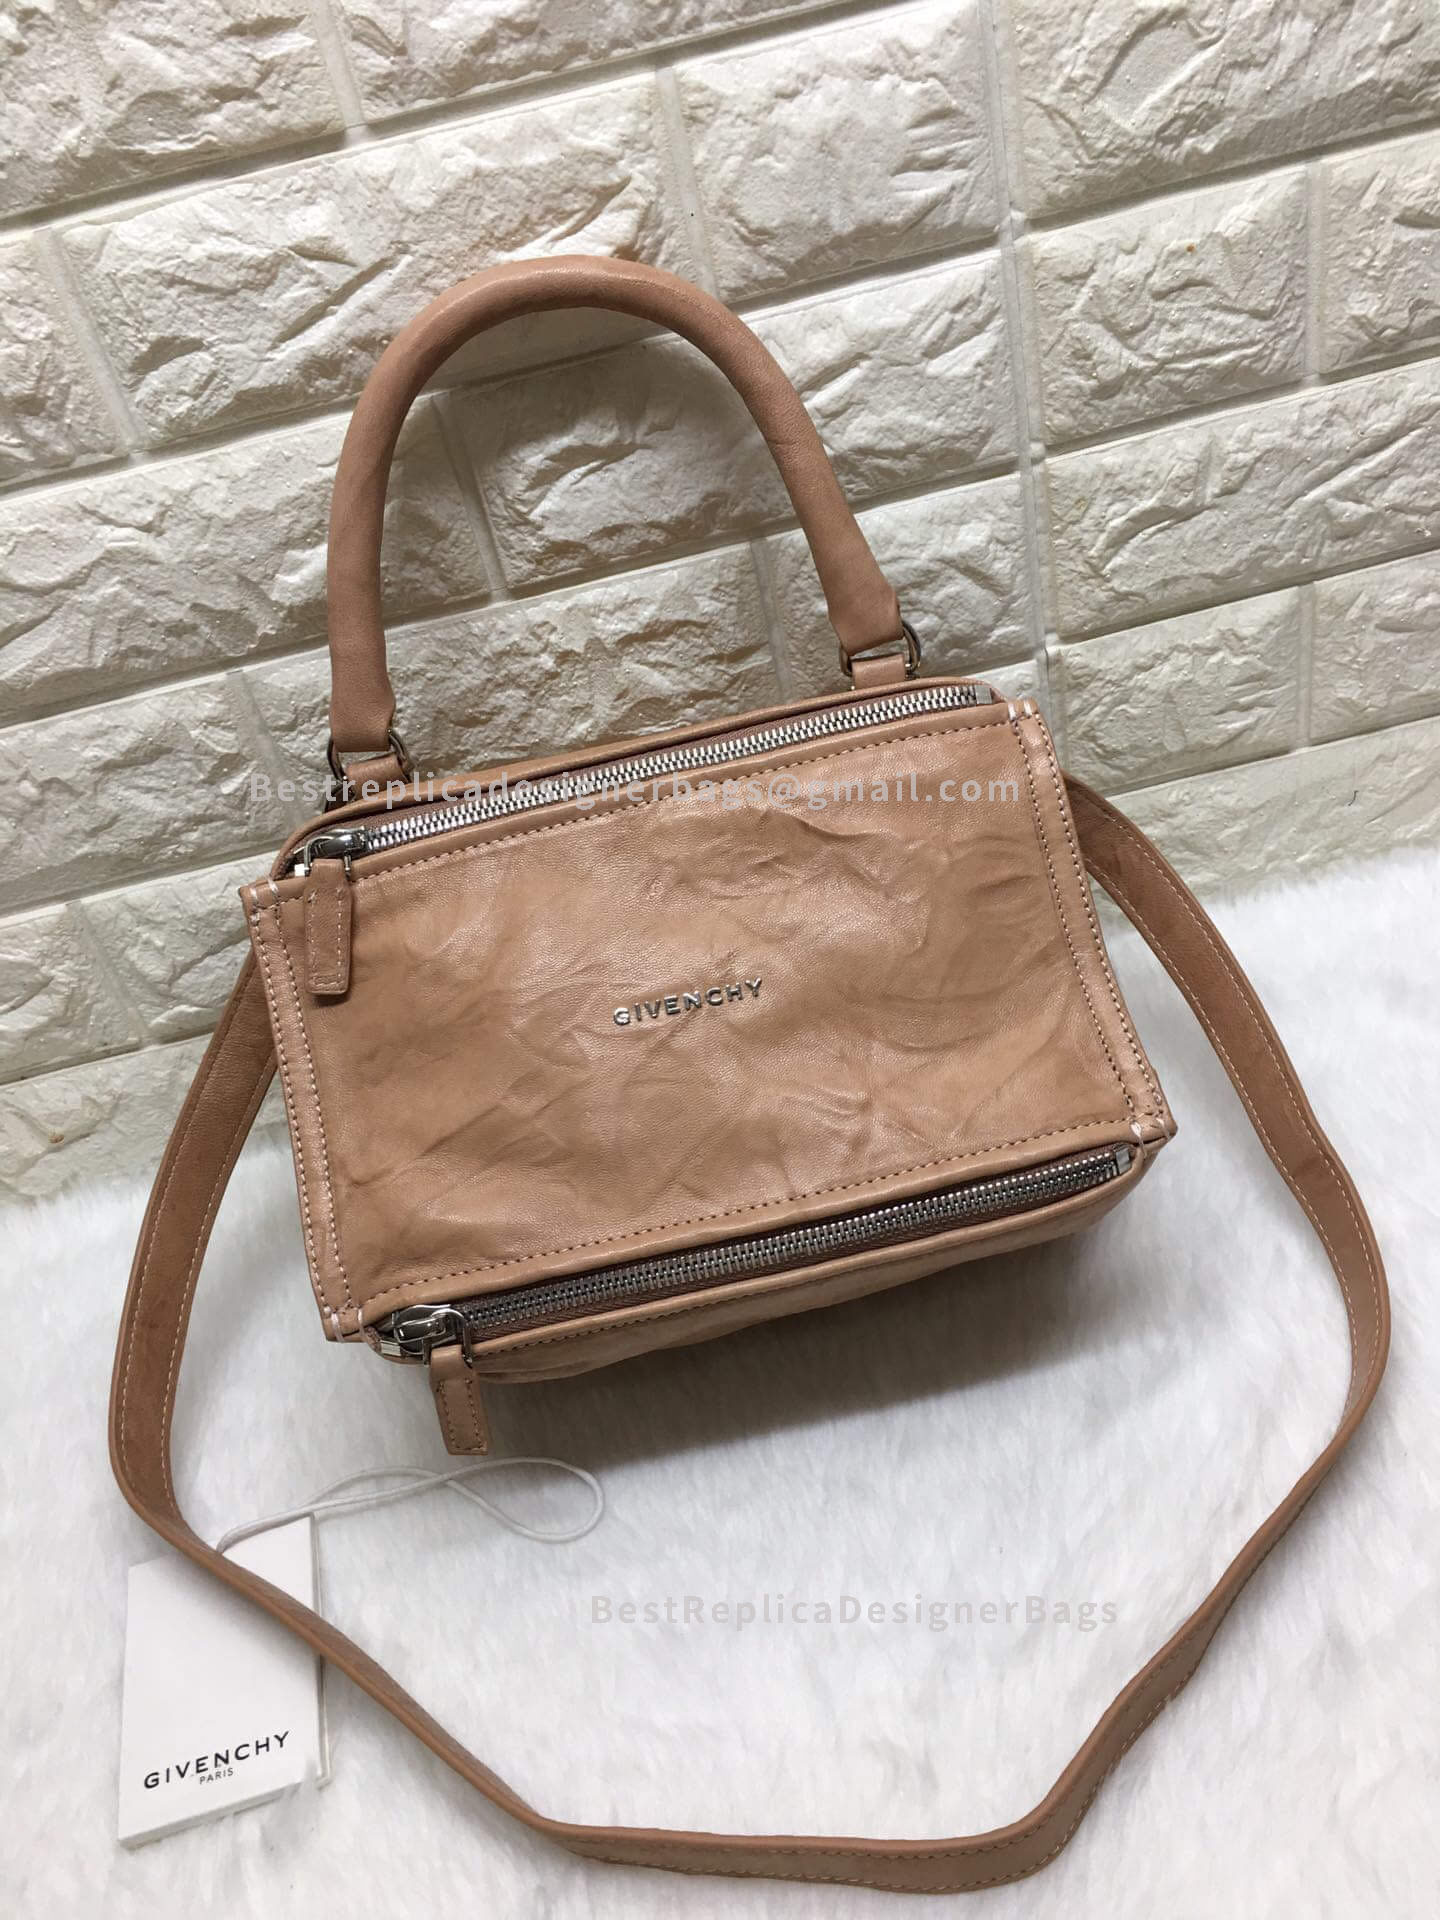 Givenchy Mini Pandora Bag In Aged Leather Nude SHW 1-28588L